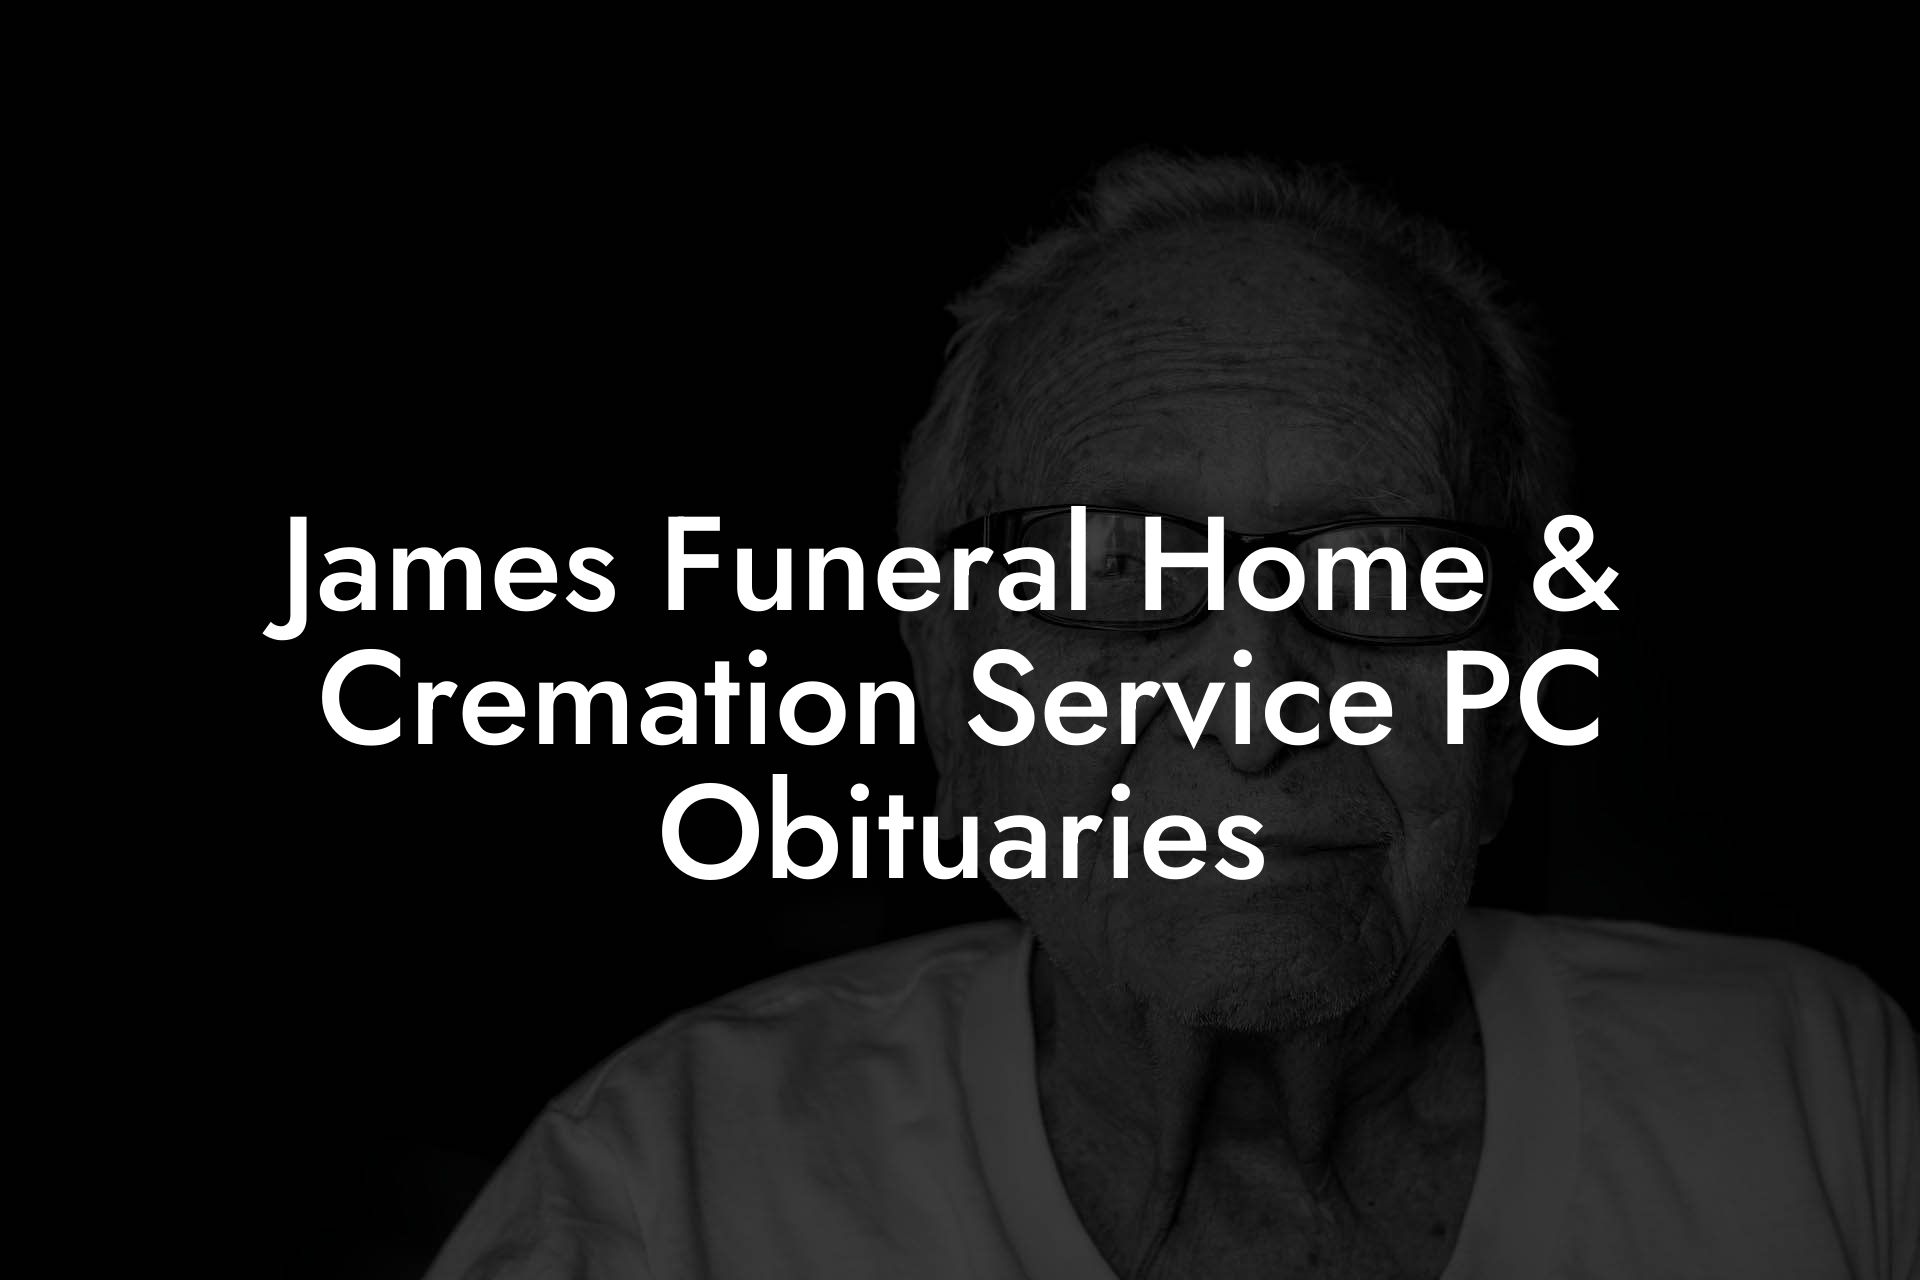 James Funeral Home & Cremation Service PC Obituaries